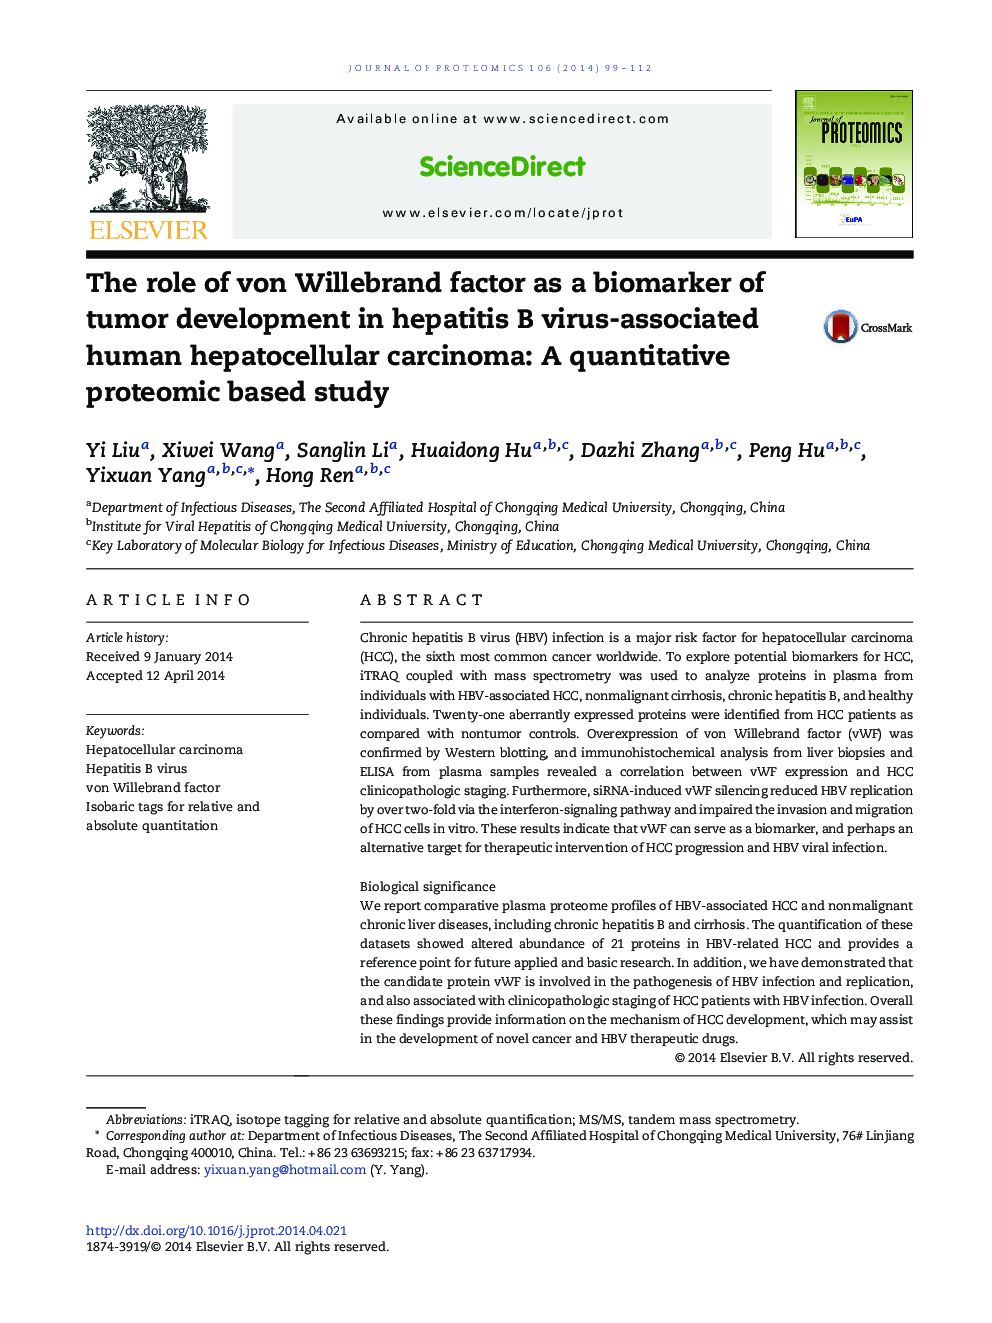 The role of von Willebrand factor as a biomarker of tumor development in hepatitis B virus-associated human hepatocellular carcinoma: A quantitative proteomic based study